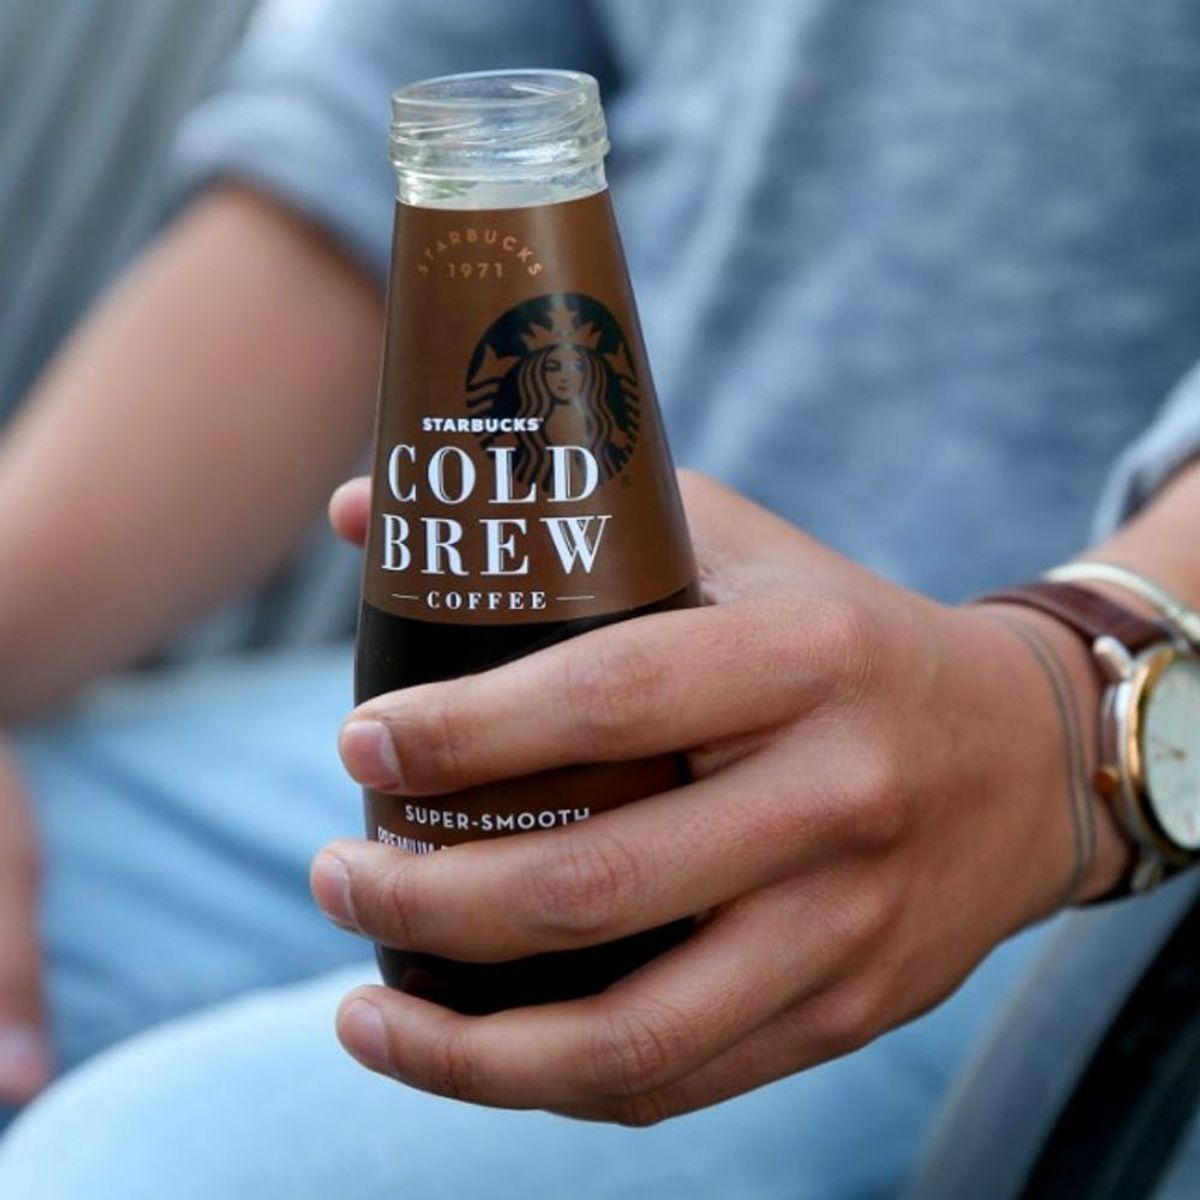 Now You Can Get Starbucks Cold Brew in a Bottle